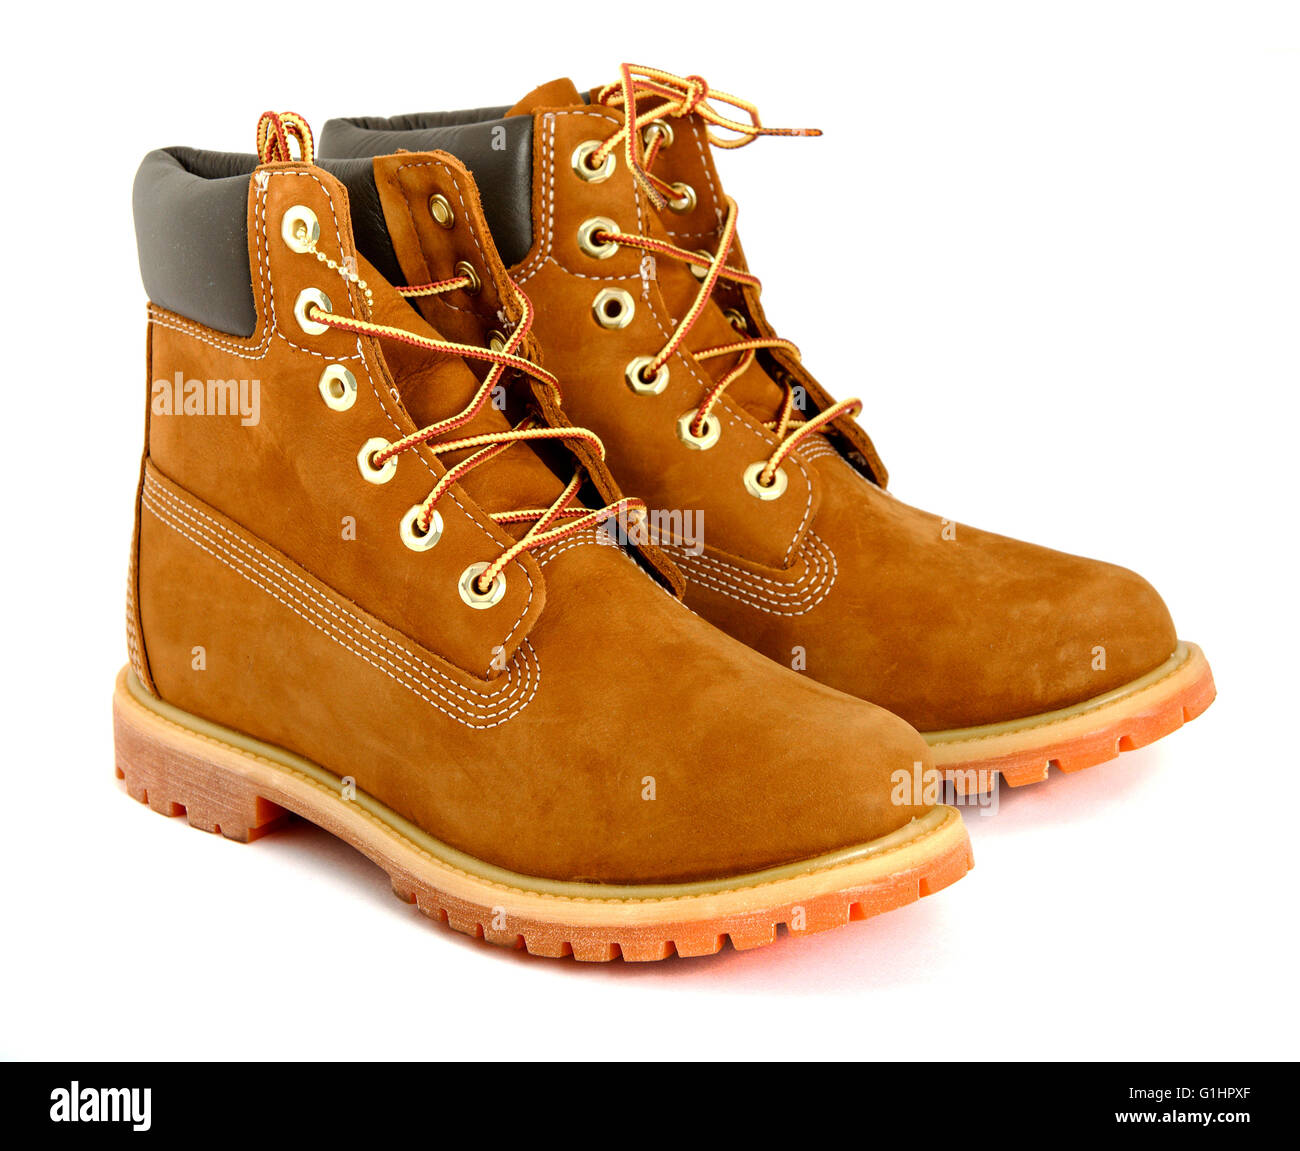 Brown lady's boots with shoelace on white background. Stock Photo